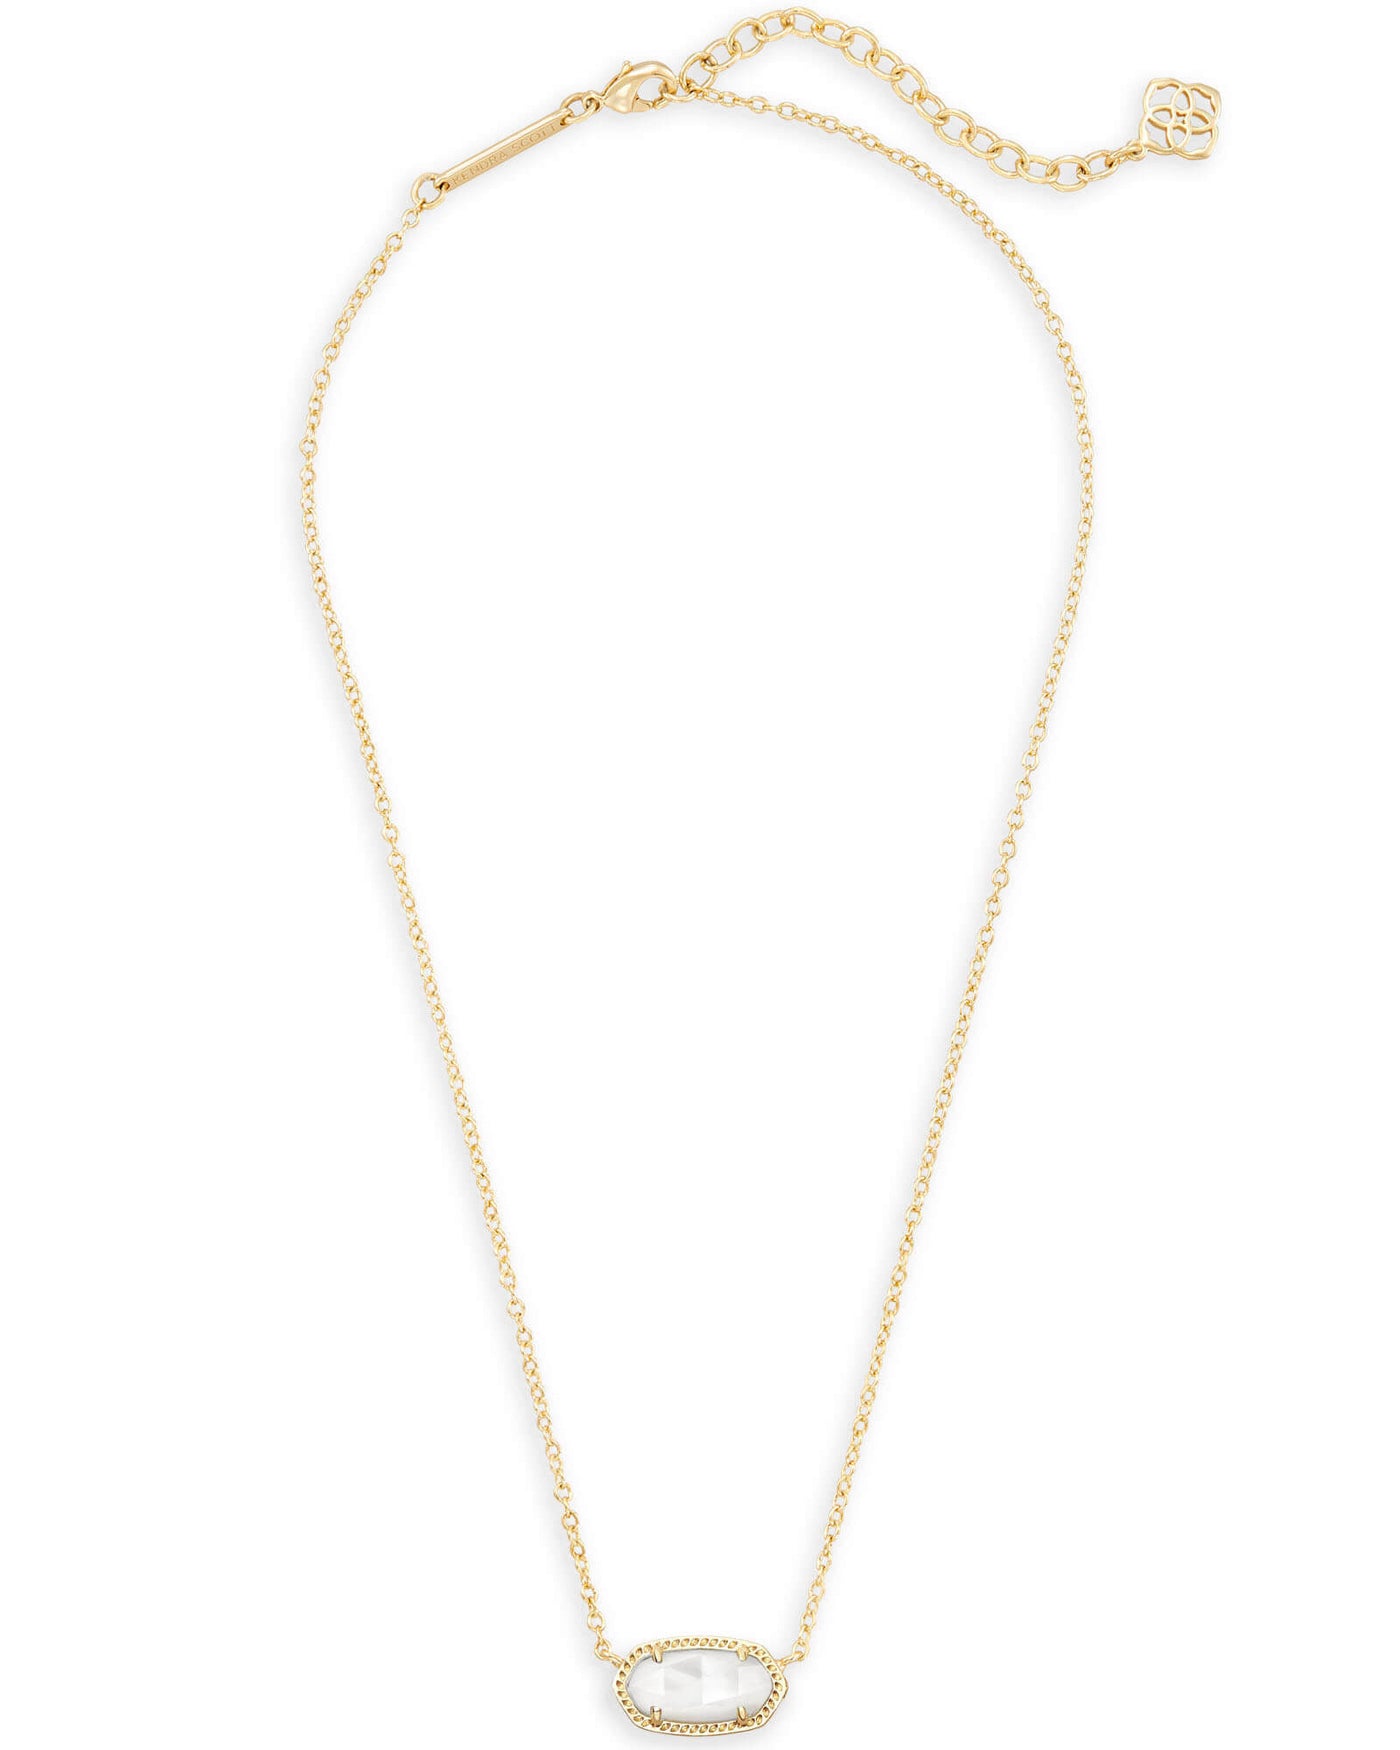 Kendra Scott Elisa Pendant Necklace in Ivory Mother-Of-Pearl-Necklaces-Kendra Scott-Market Street Nest, Fashionable Clothing, Shoes and Home Décor Located in Mabank, TX